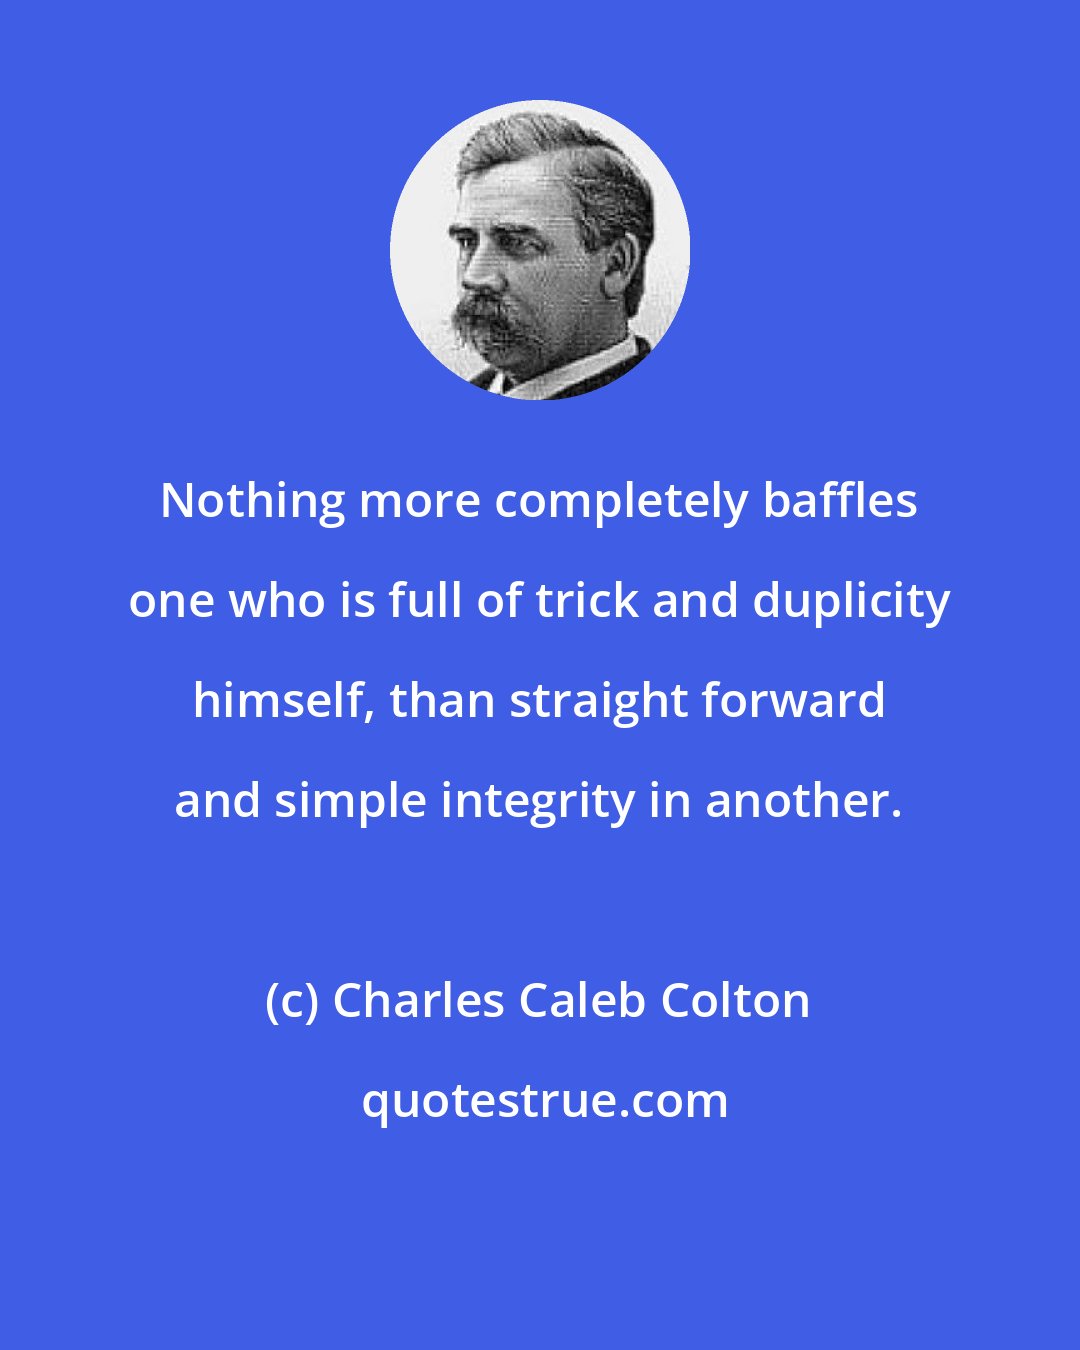 Charles Caleb Colton: Nothing more completely baffles one who is full of trick and duplicity himself, than straight forward and simple integrity in another.